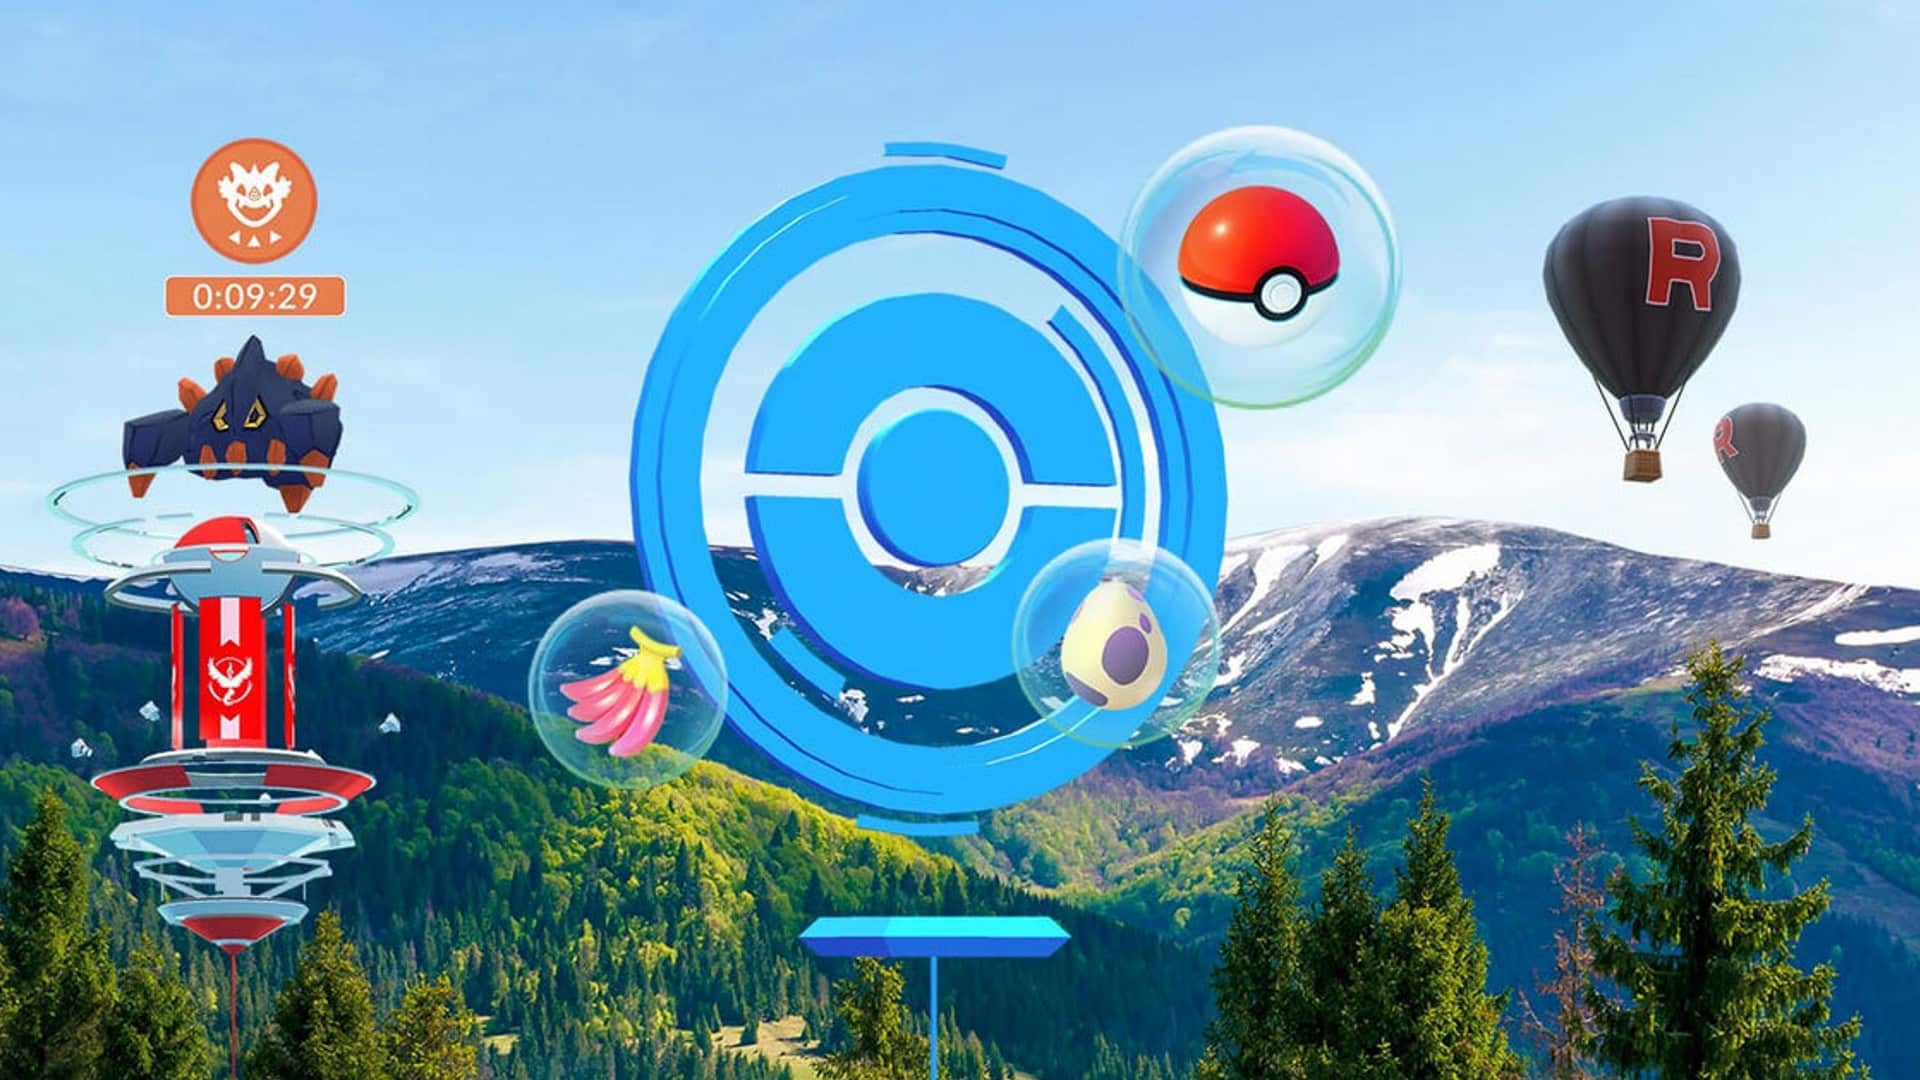 How to get PokeCoins in Pokemon Go